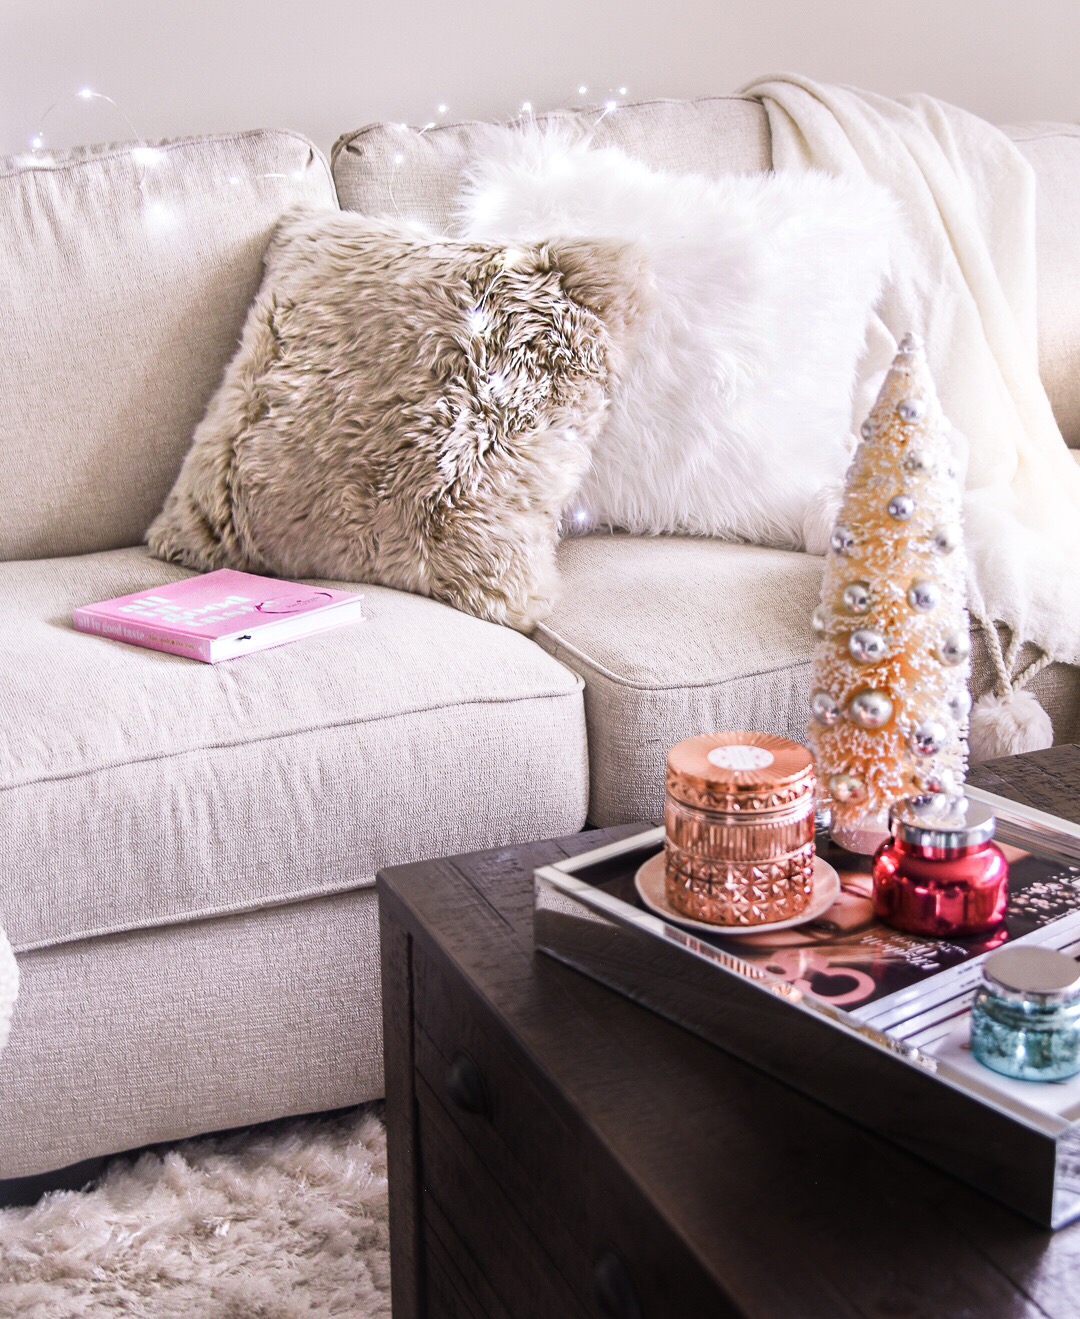 how to style a coffee table - how to decorate a cozy home by Chicago style blogger Visions of Vogue